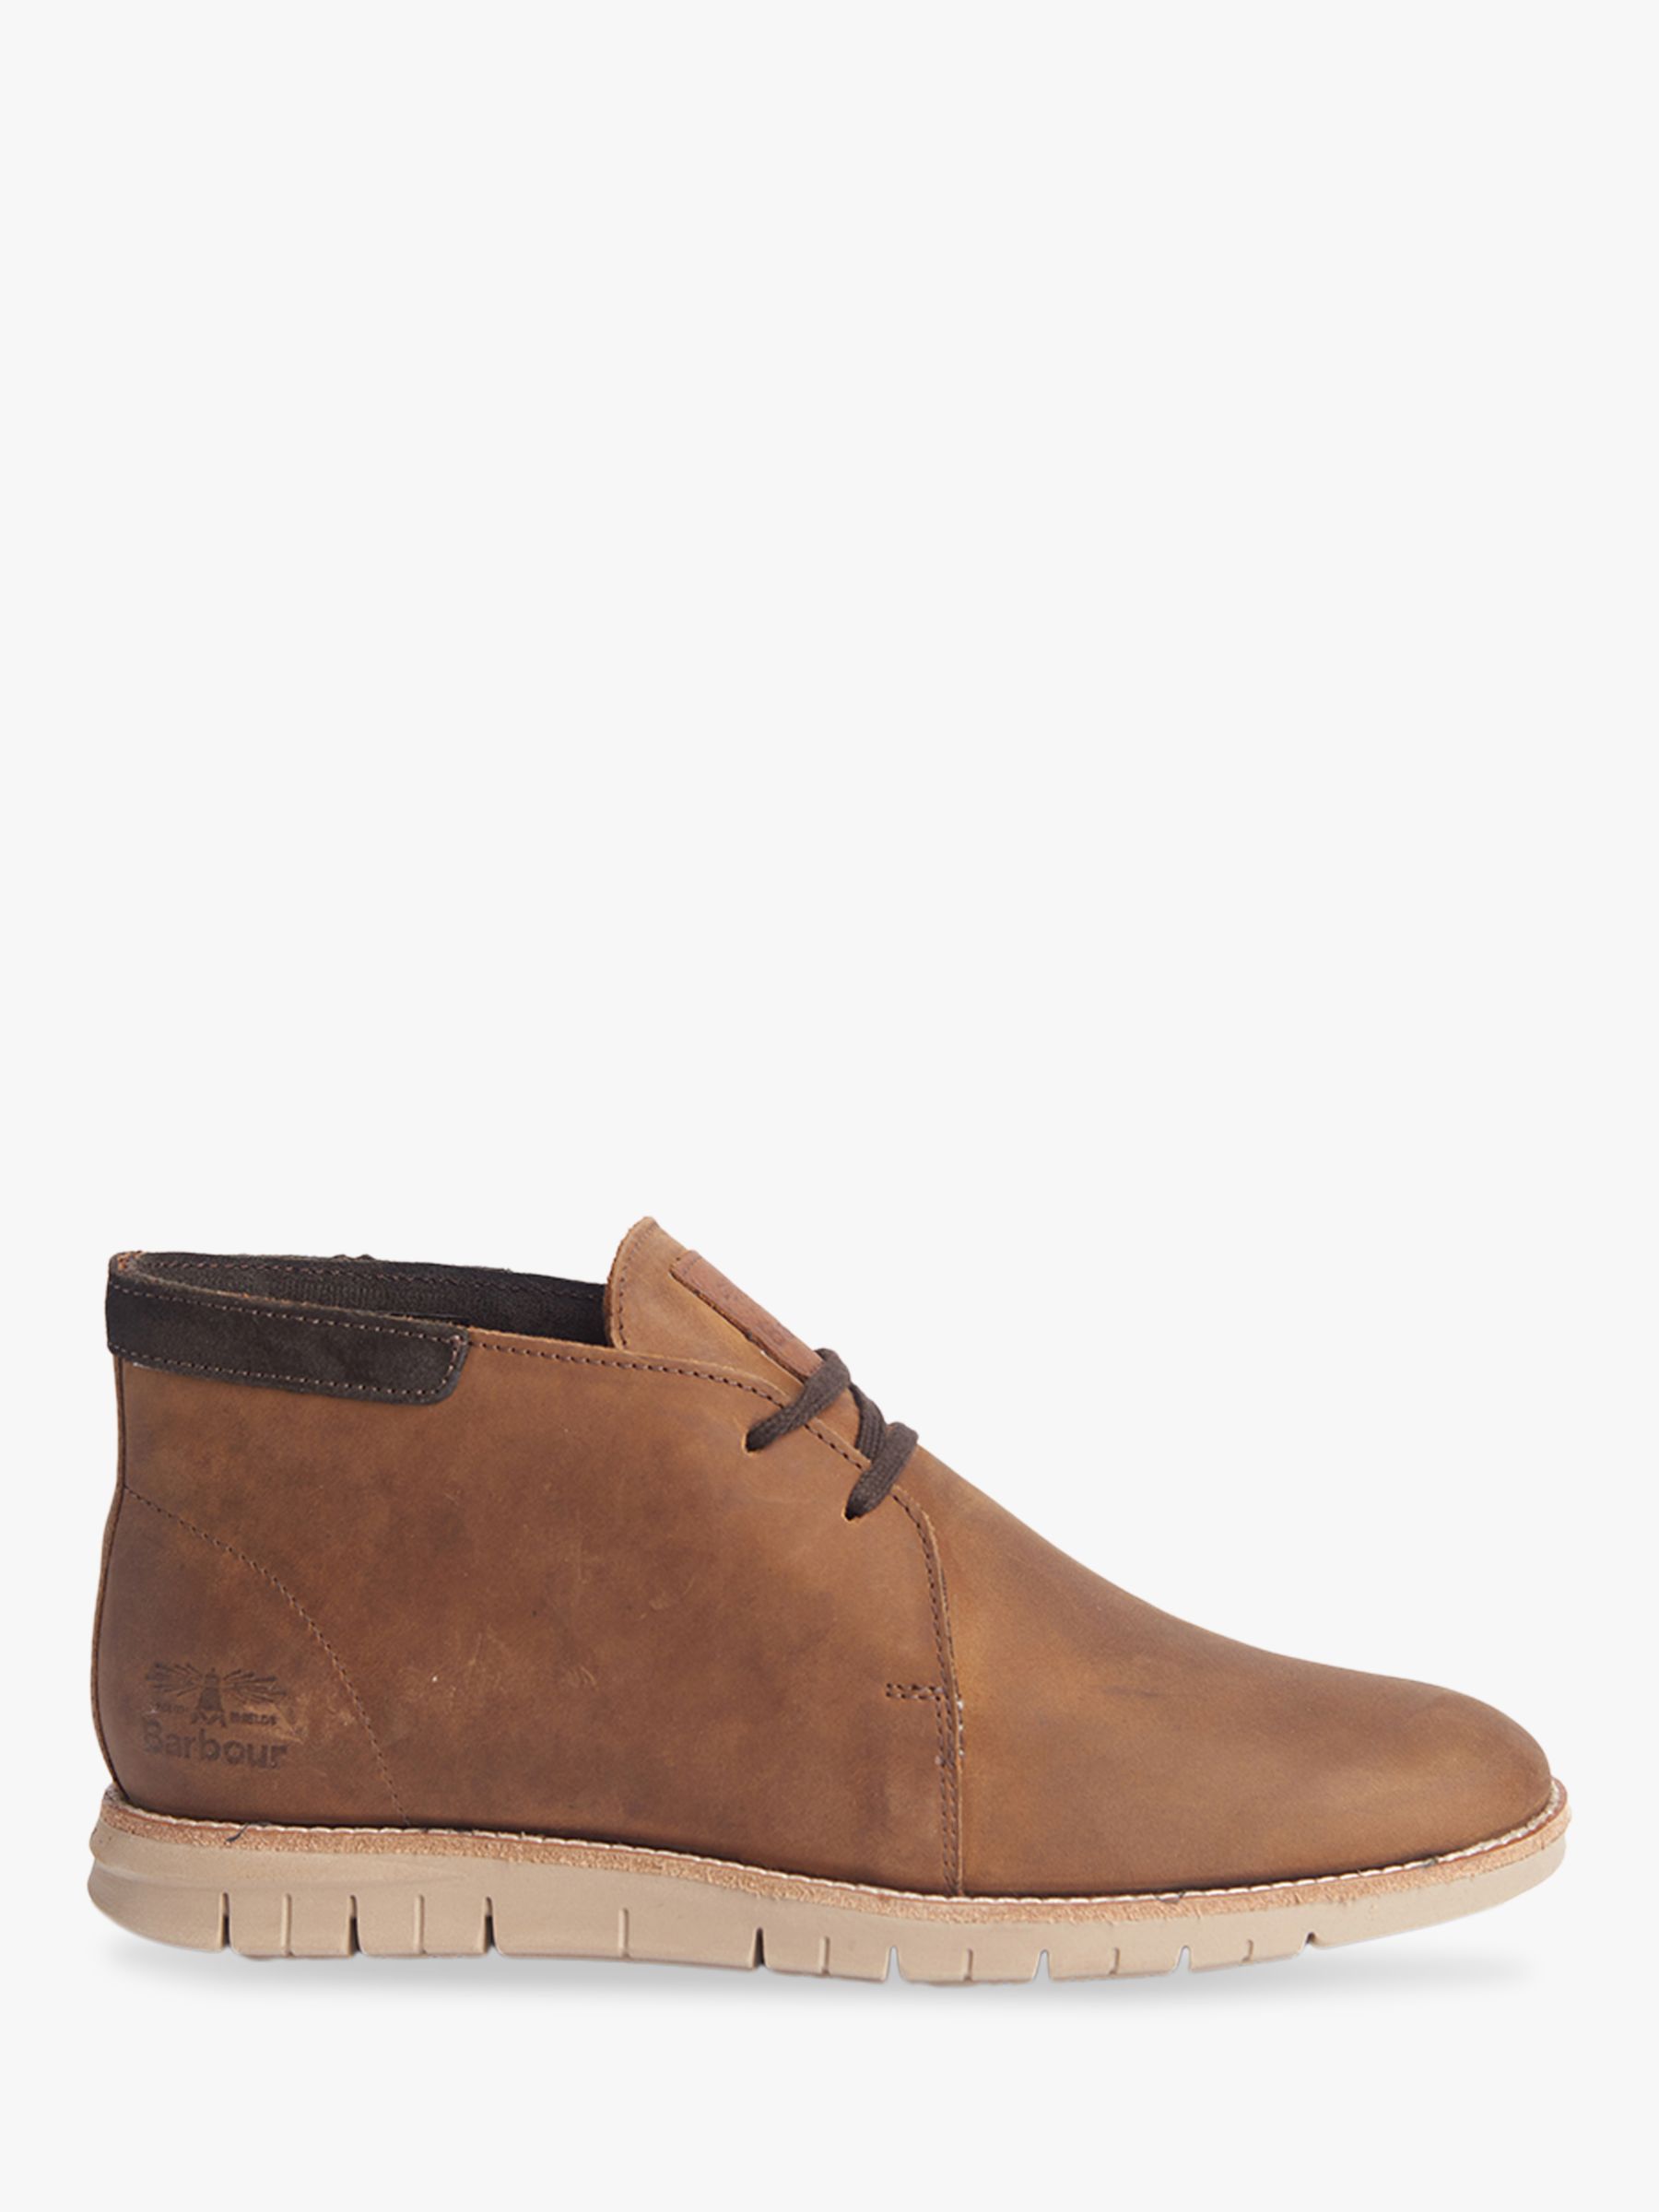 Barbour Boughton Leather Chukka Boots 